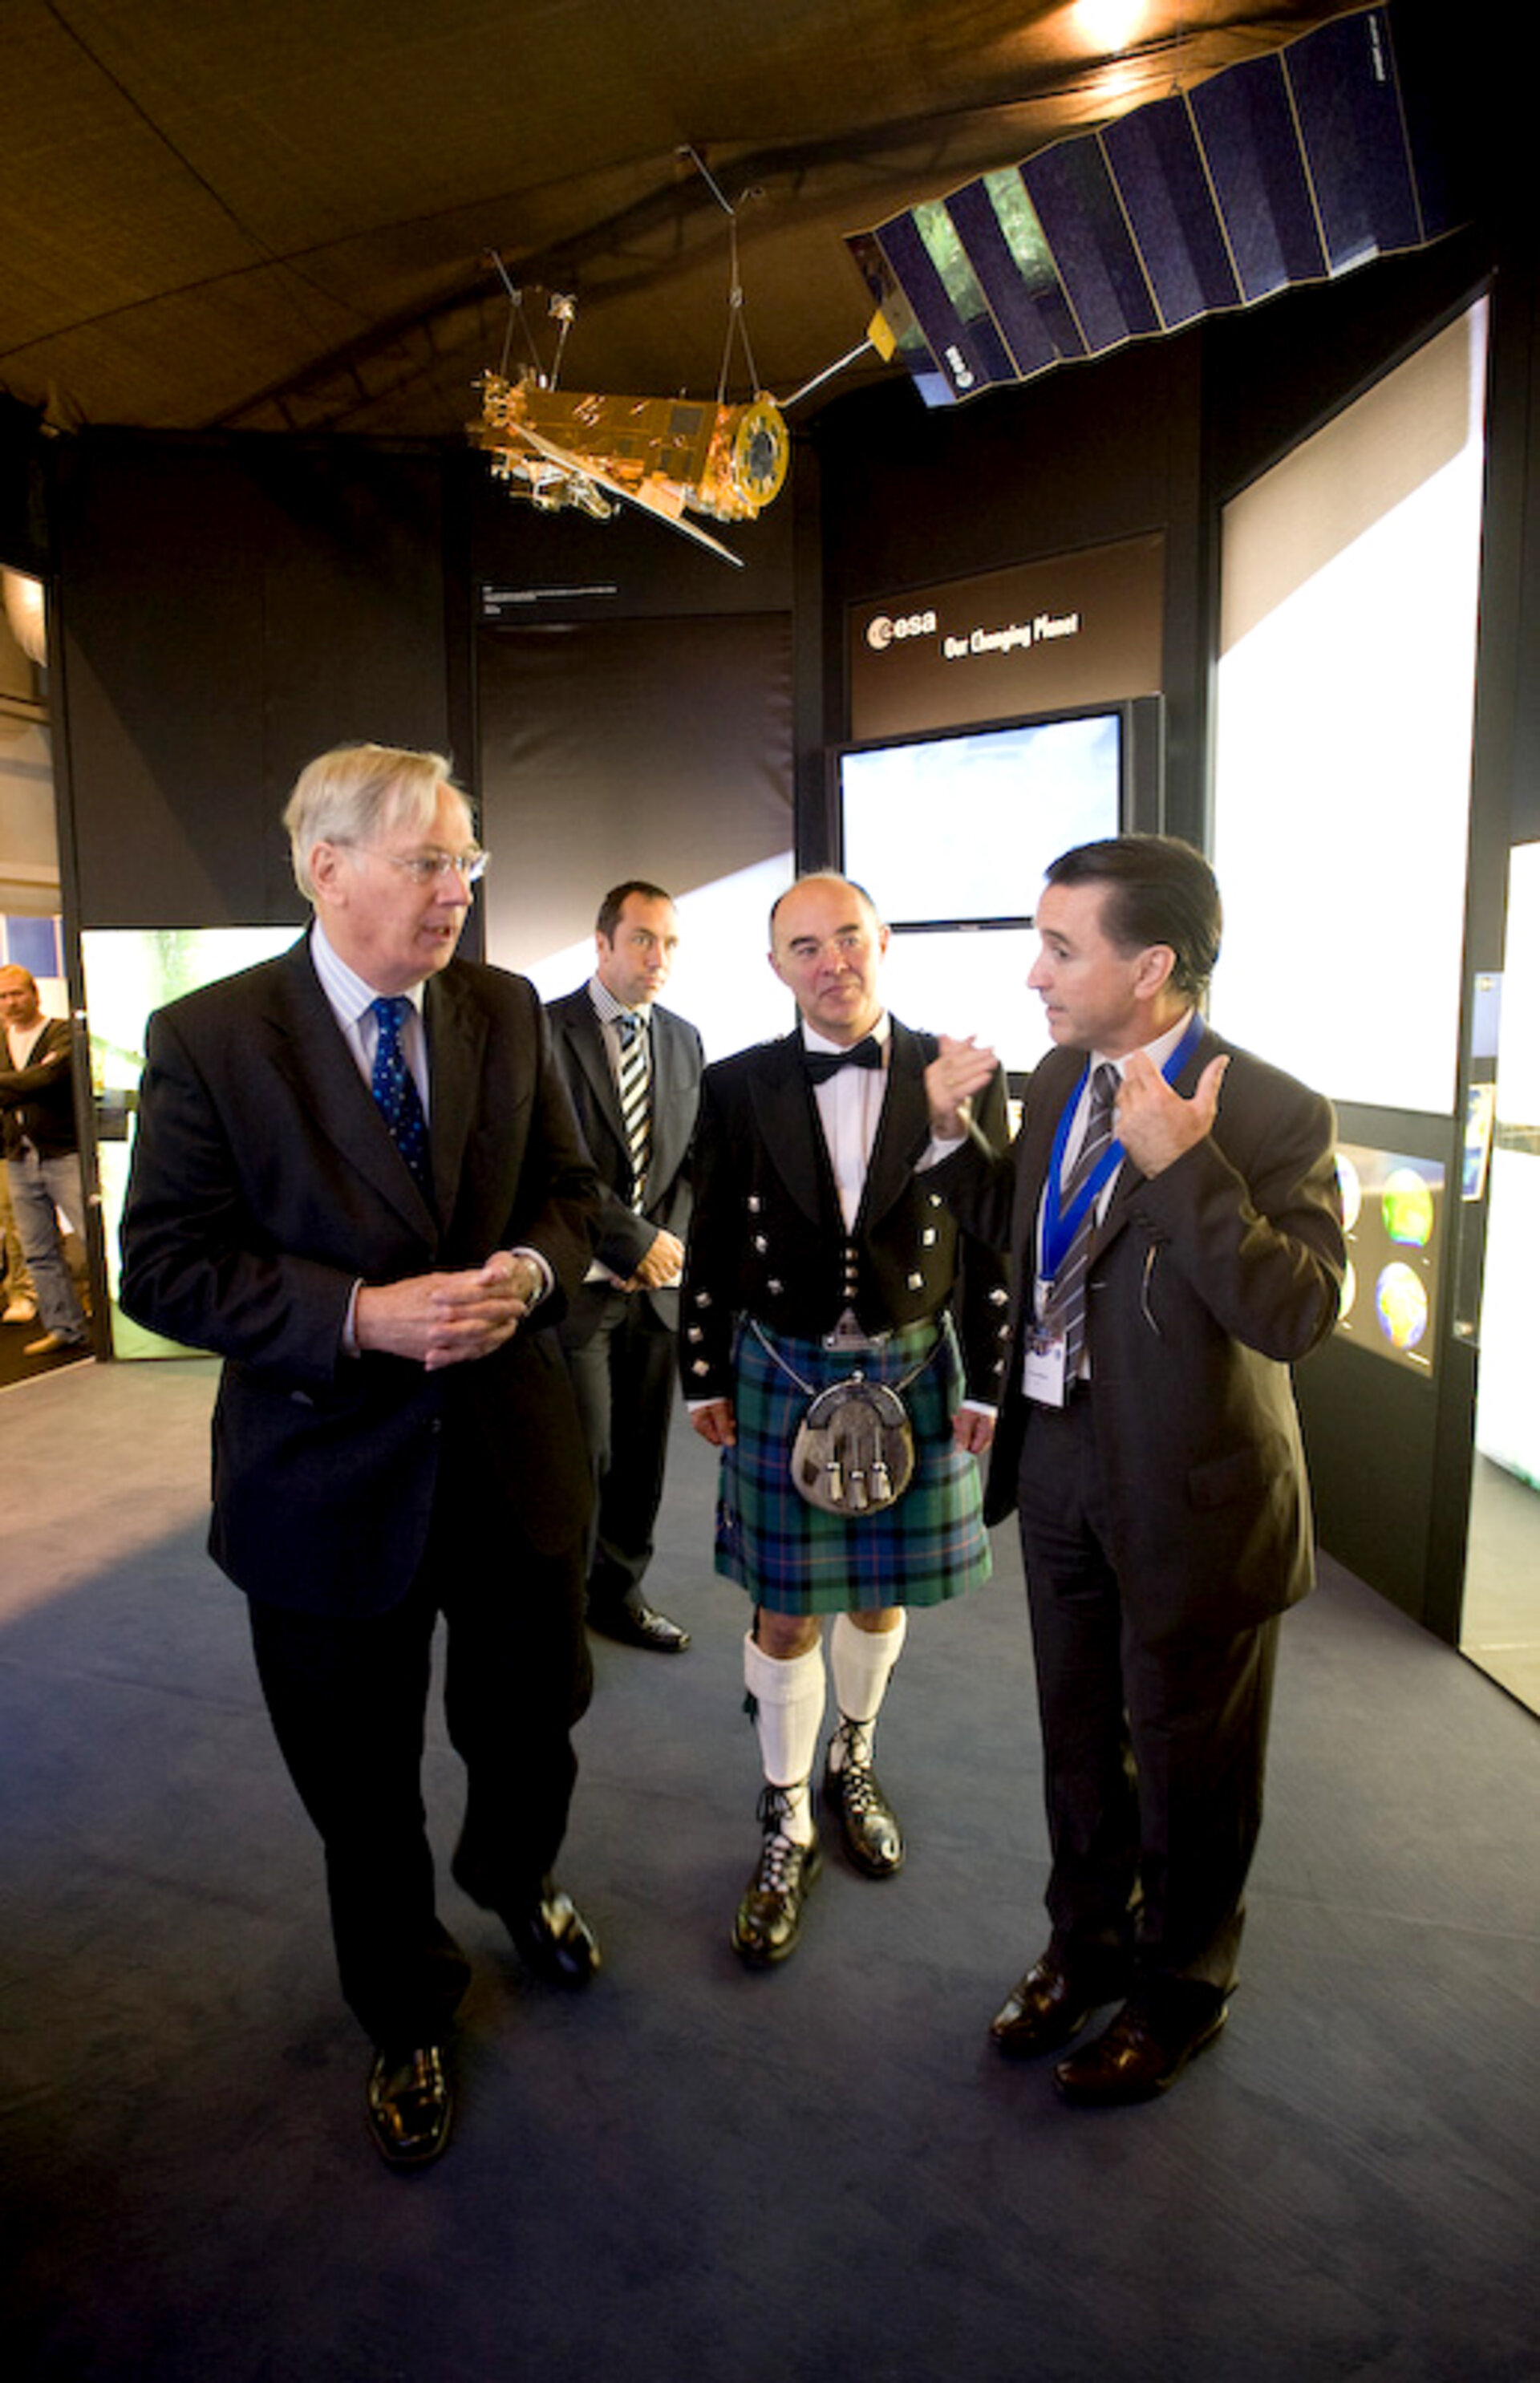 The Duke of Gloucester visits ESA's stand at IAC 2008